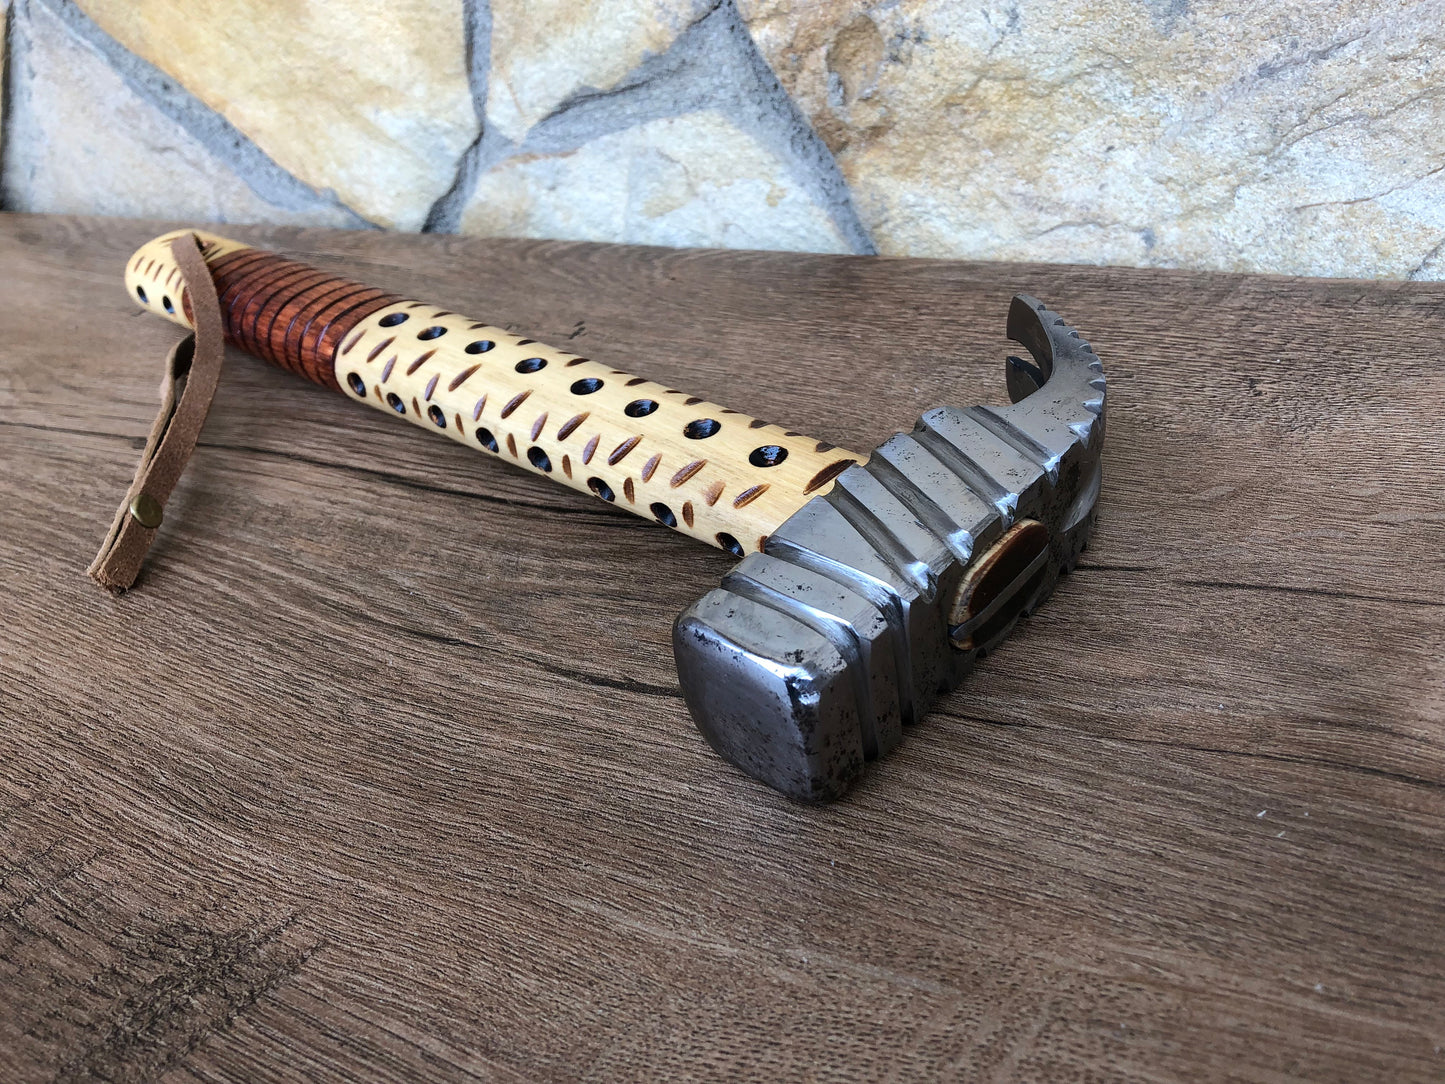 Claw hammer, hand crafted carpenter's claw hammer, hammer, hand crafted hammer, custom hammer, personalized hammer, engraved hammer, tools